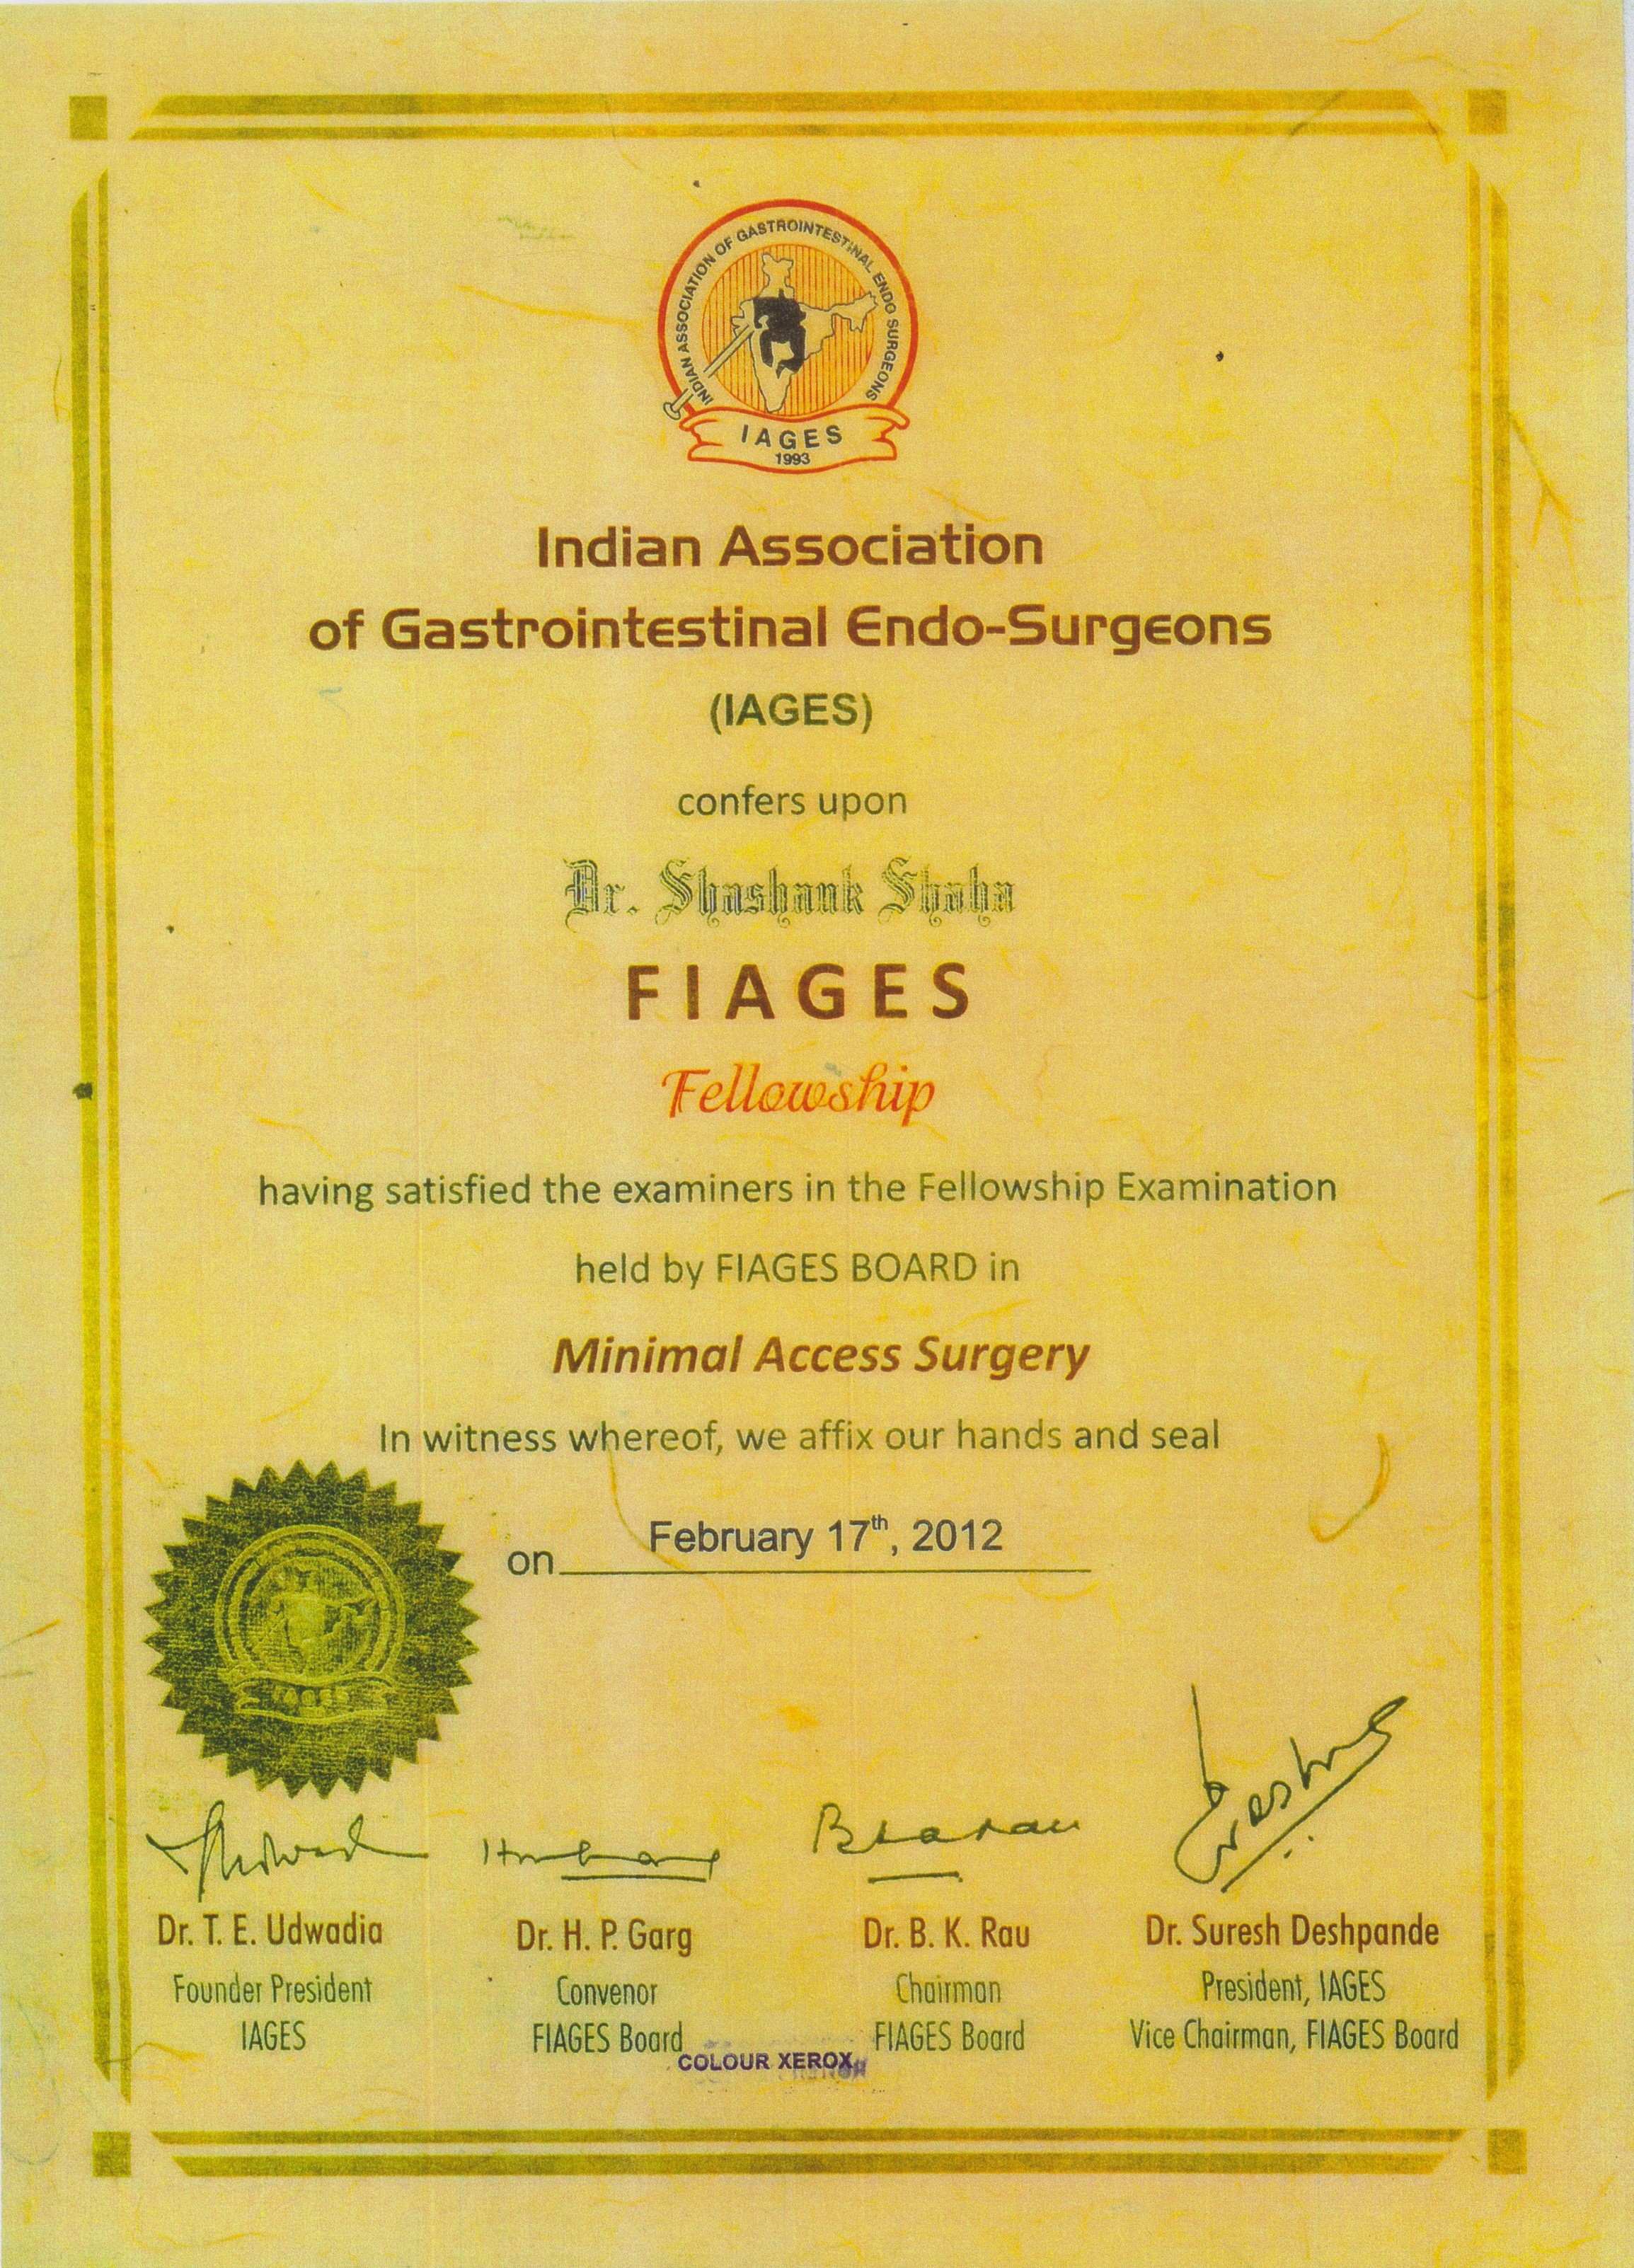 Dr Shashank Shah was conferred the Honorary Fellowship in Advanced Laparoscopic Surgery (FALS) by the Indian Association of Gastrointestinal Endo Surgeons (IAGES) in 2012. 